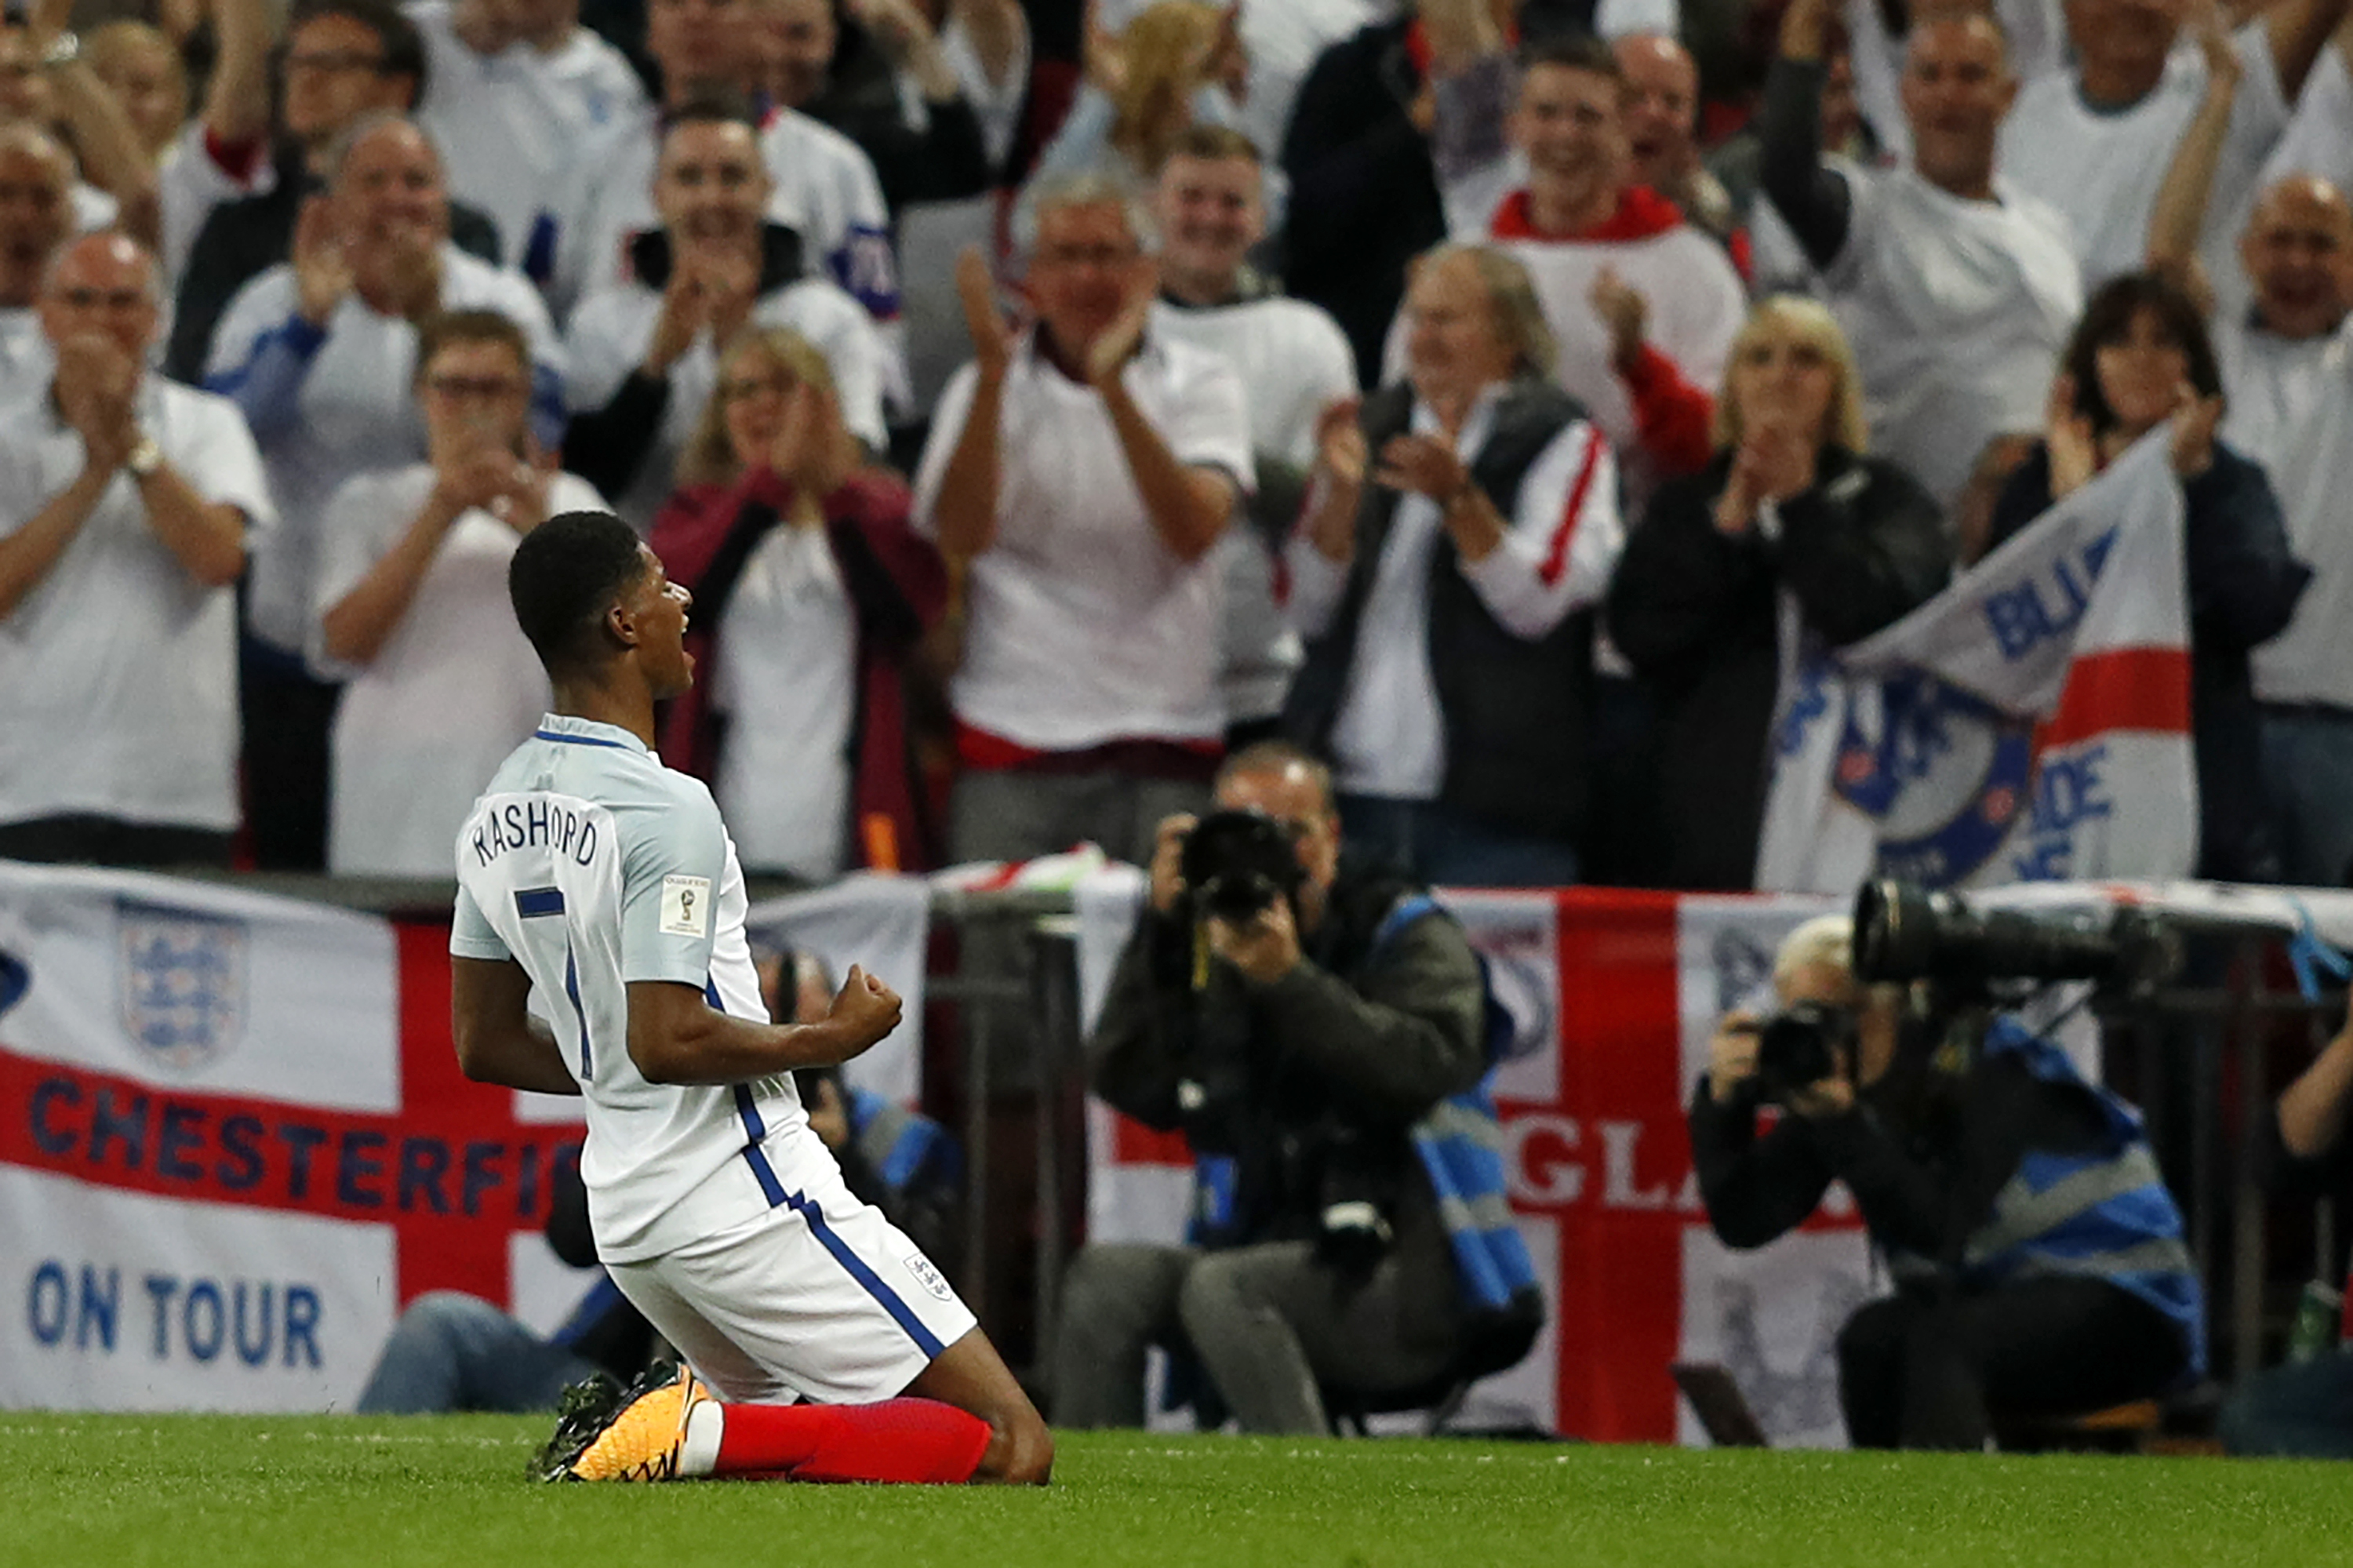 England's striker Marcus Rashford celebrates scoring England's second goal during the World Cup 2018 qualification football match between England and Slovakia at Wembley Stadium in London on September 4, 2017.  / AFP PHOTO / Adrian DENNIS / NOT FOR MARKETING OR ADVERTISING USE / RESTRICTED TO EDITORIAL USE
        (Photo credit should read ADRIAN DENNIS/AFP/Getty Images)